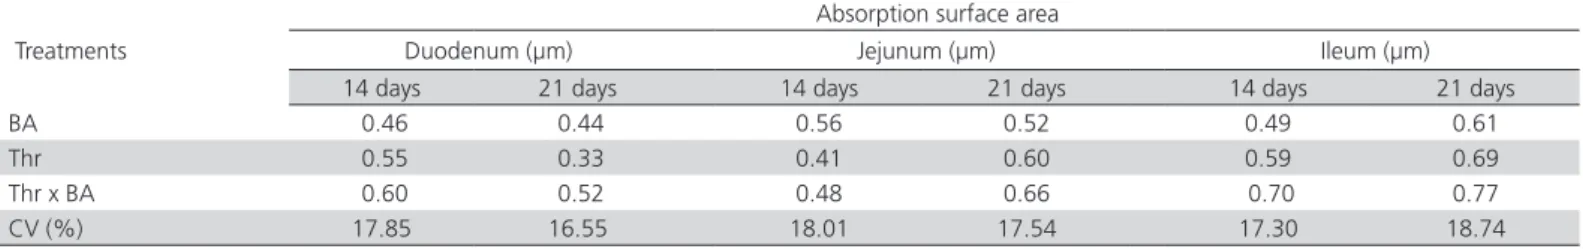 Table 9 – Statistical probability of the effects of breeder age (BA) and dietary digestible threonine levels (Thr; mg/kg diet) on  the absorption surface area (μm²) of the duodenum, jejunum, and ileum of 14- and 21-d-old broilers.